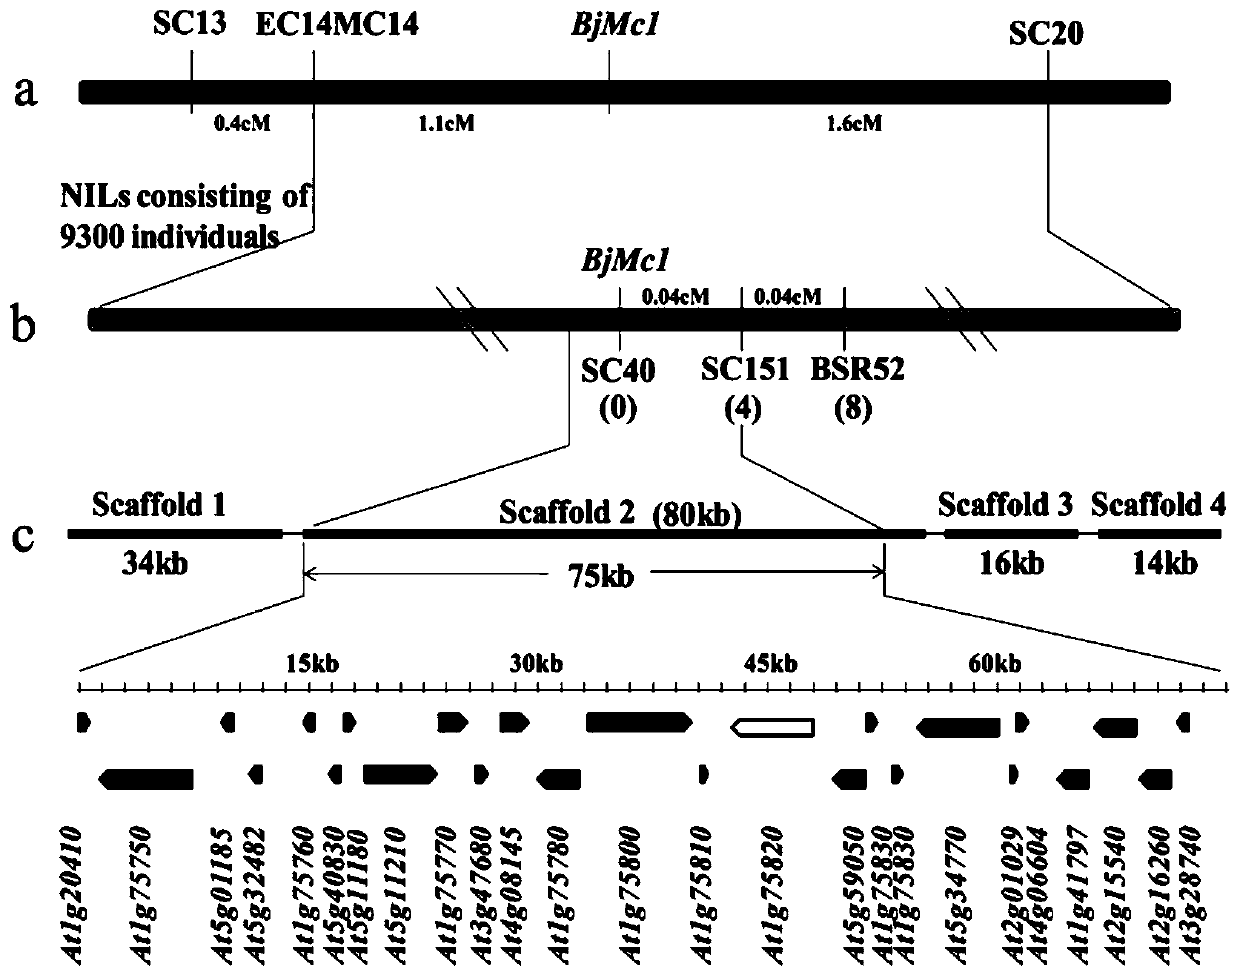 Two-chamber gene bjmc1 and three-chamber gene bjmc1 related to the multi-chamber trait of Brassica napus and its application